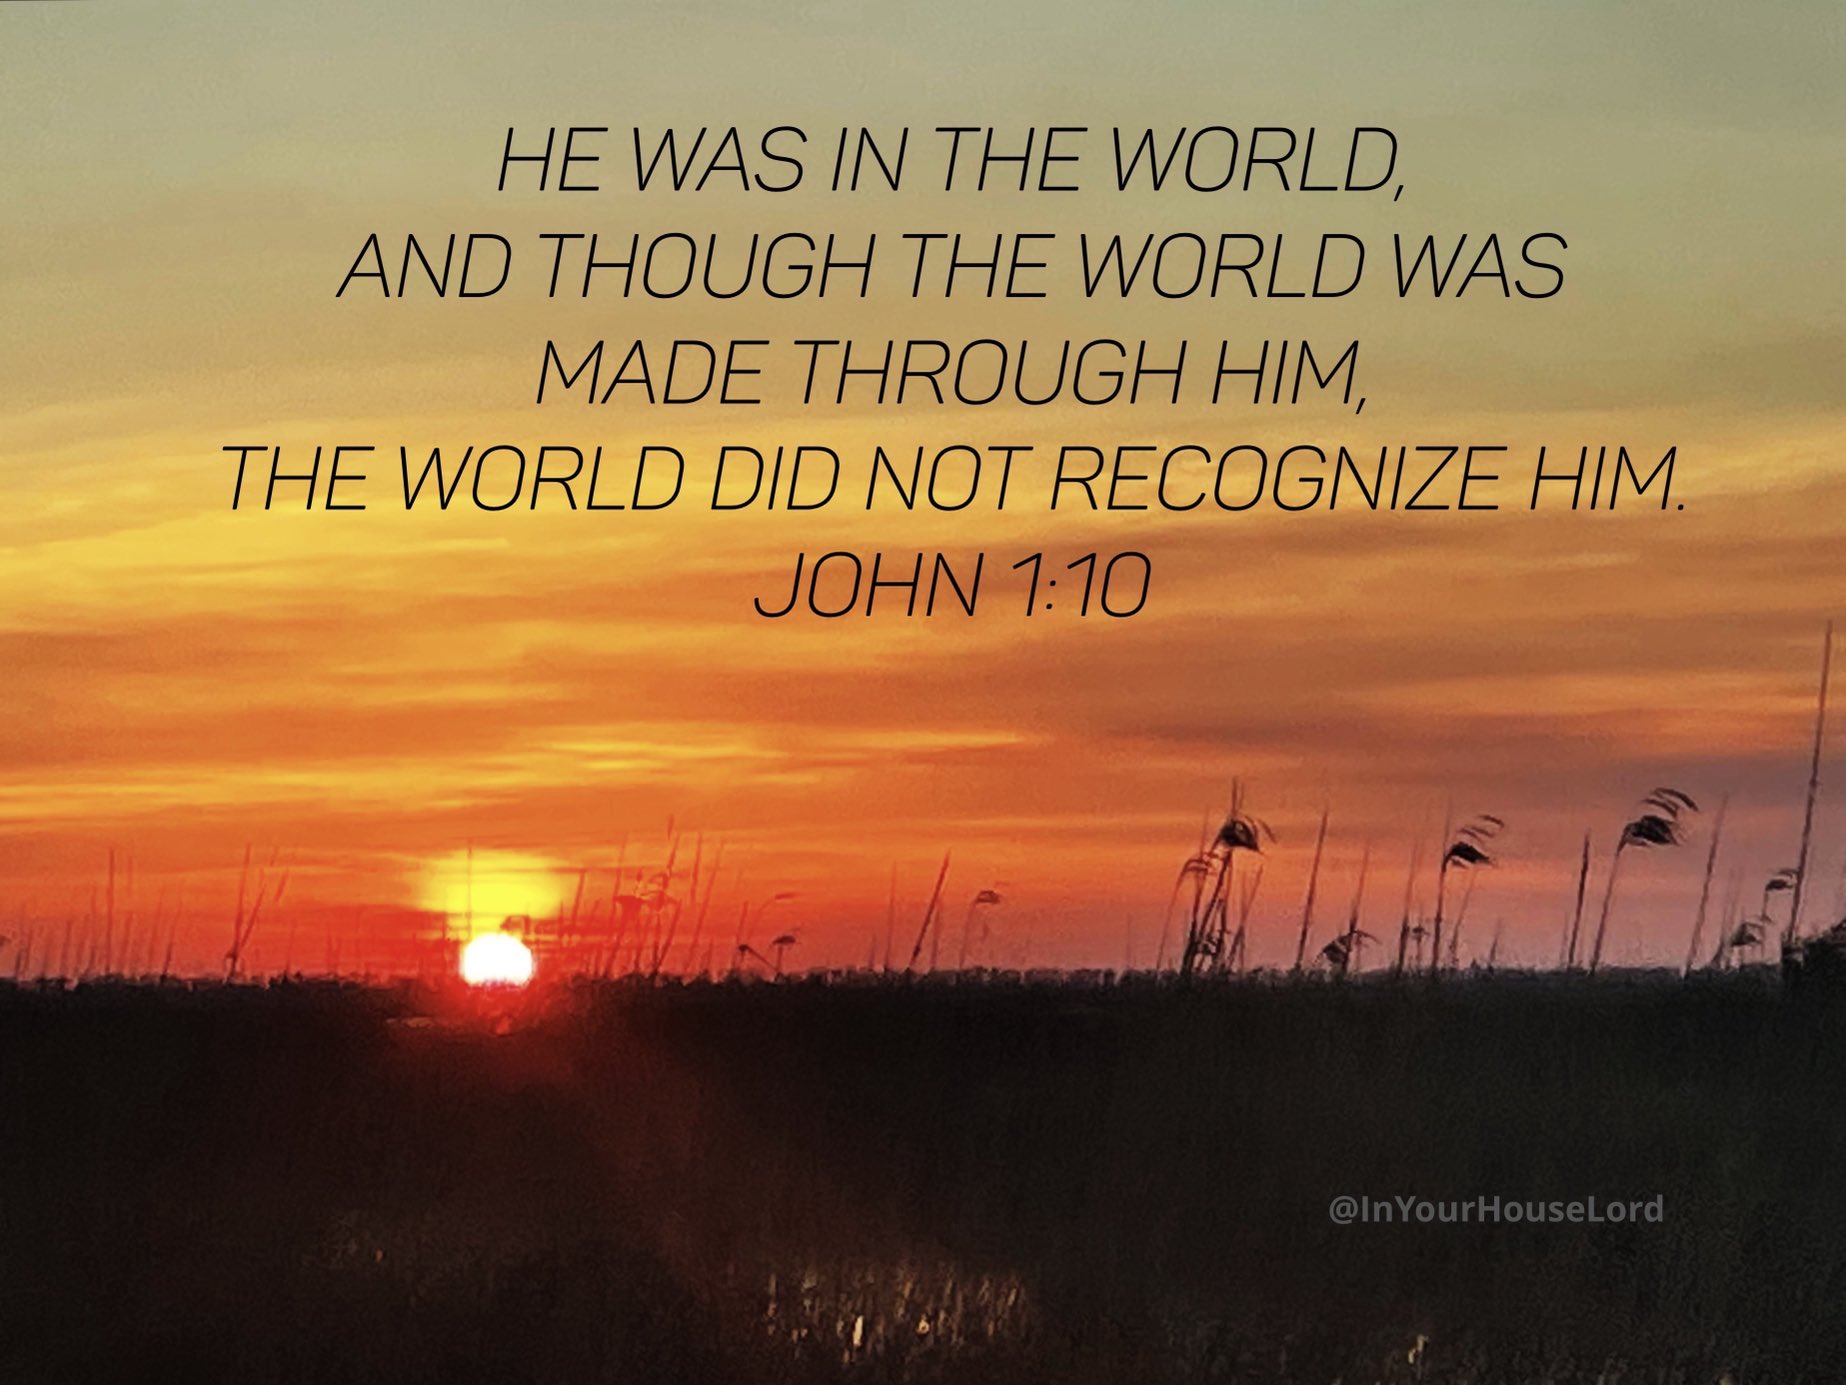 HE WAS IN THE WORLD; AND THOUGH THE WORLD WAS MADE THROUGH HIM, THE WORLD DID NOT RECOGNIZE HIM: JOHN 1:10 @InYourHouseLord